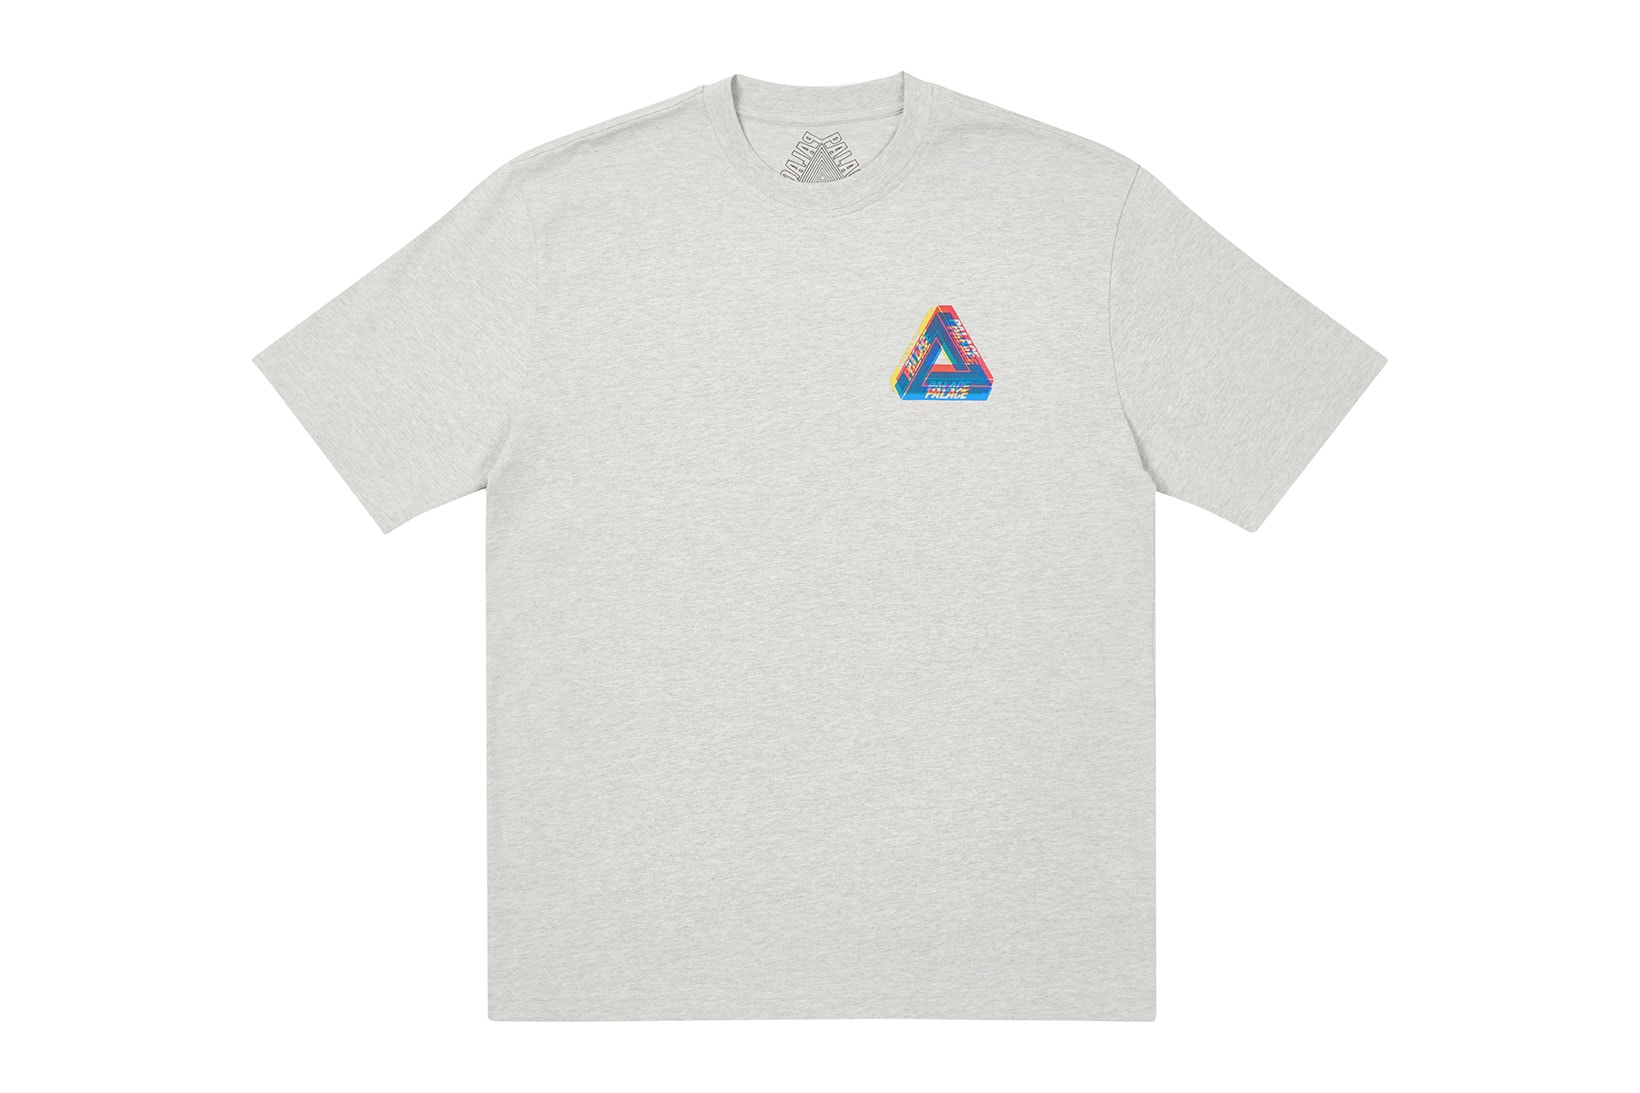 palace skateboards holiday drop 5 gray t-shirts tees release when to buy